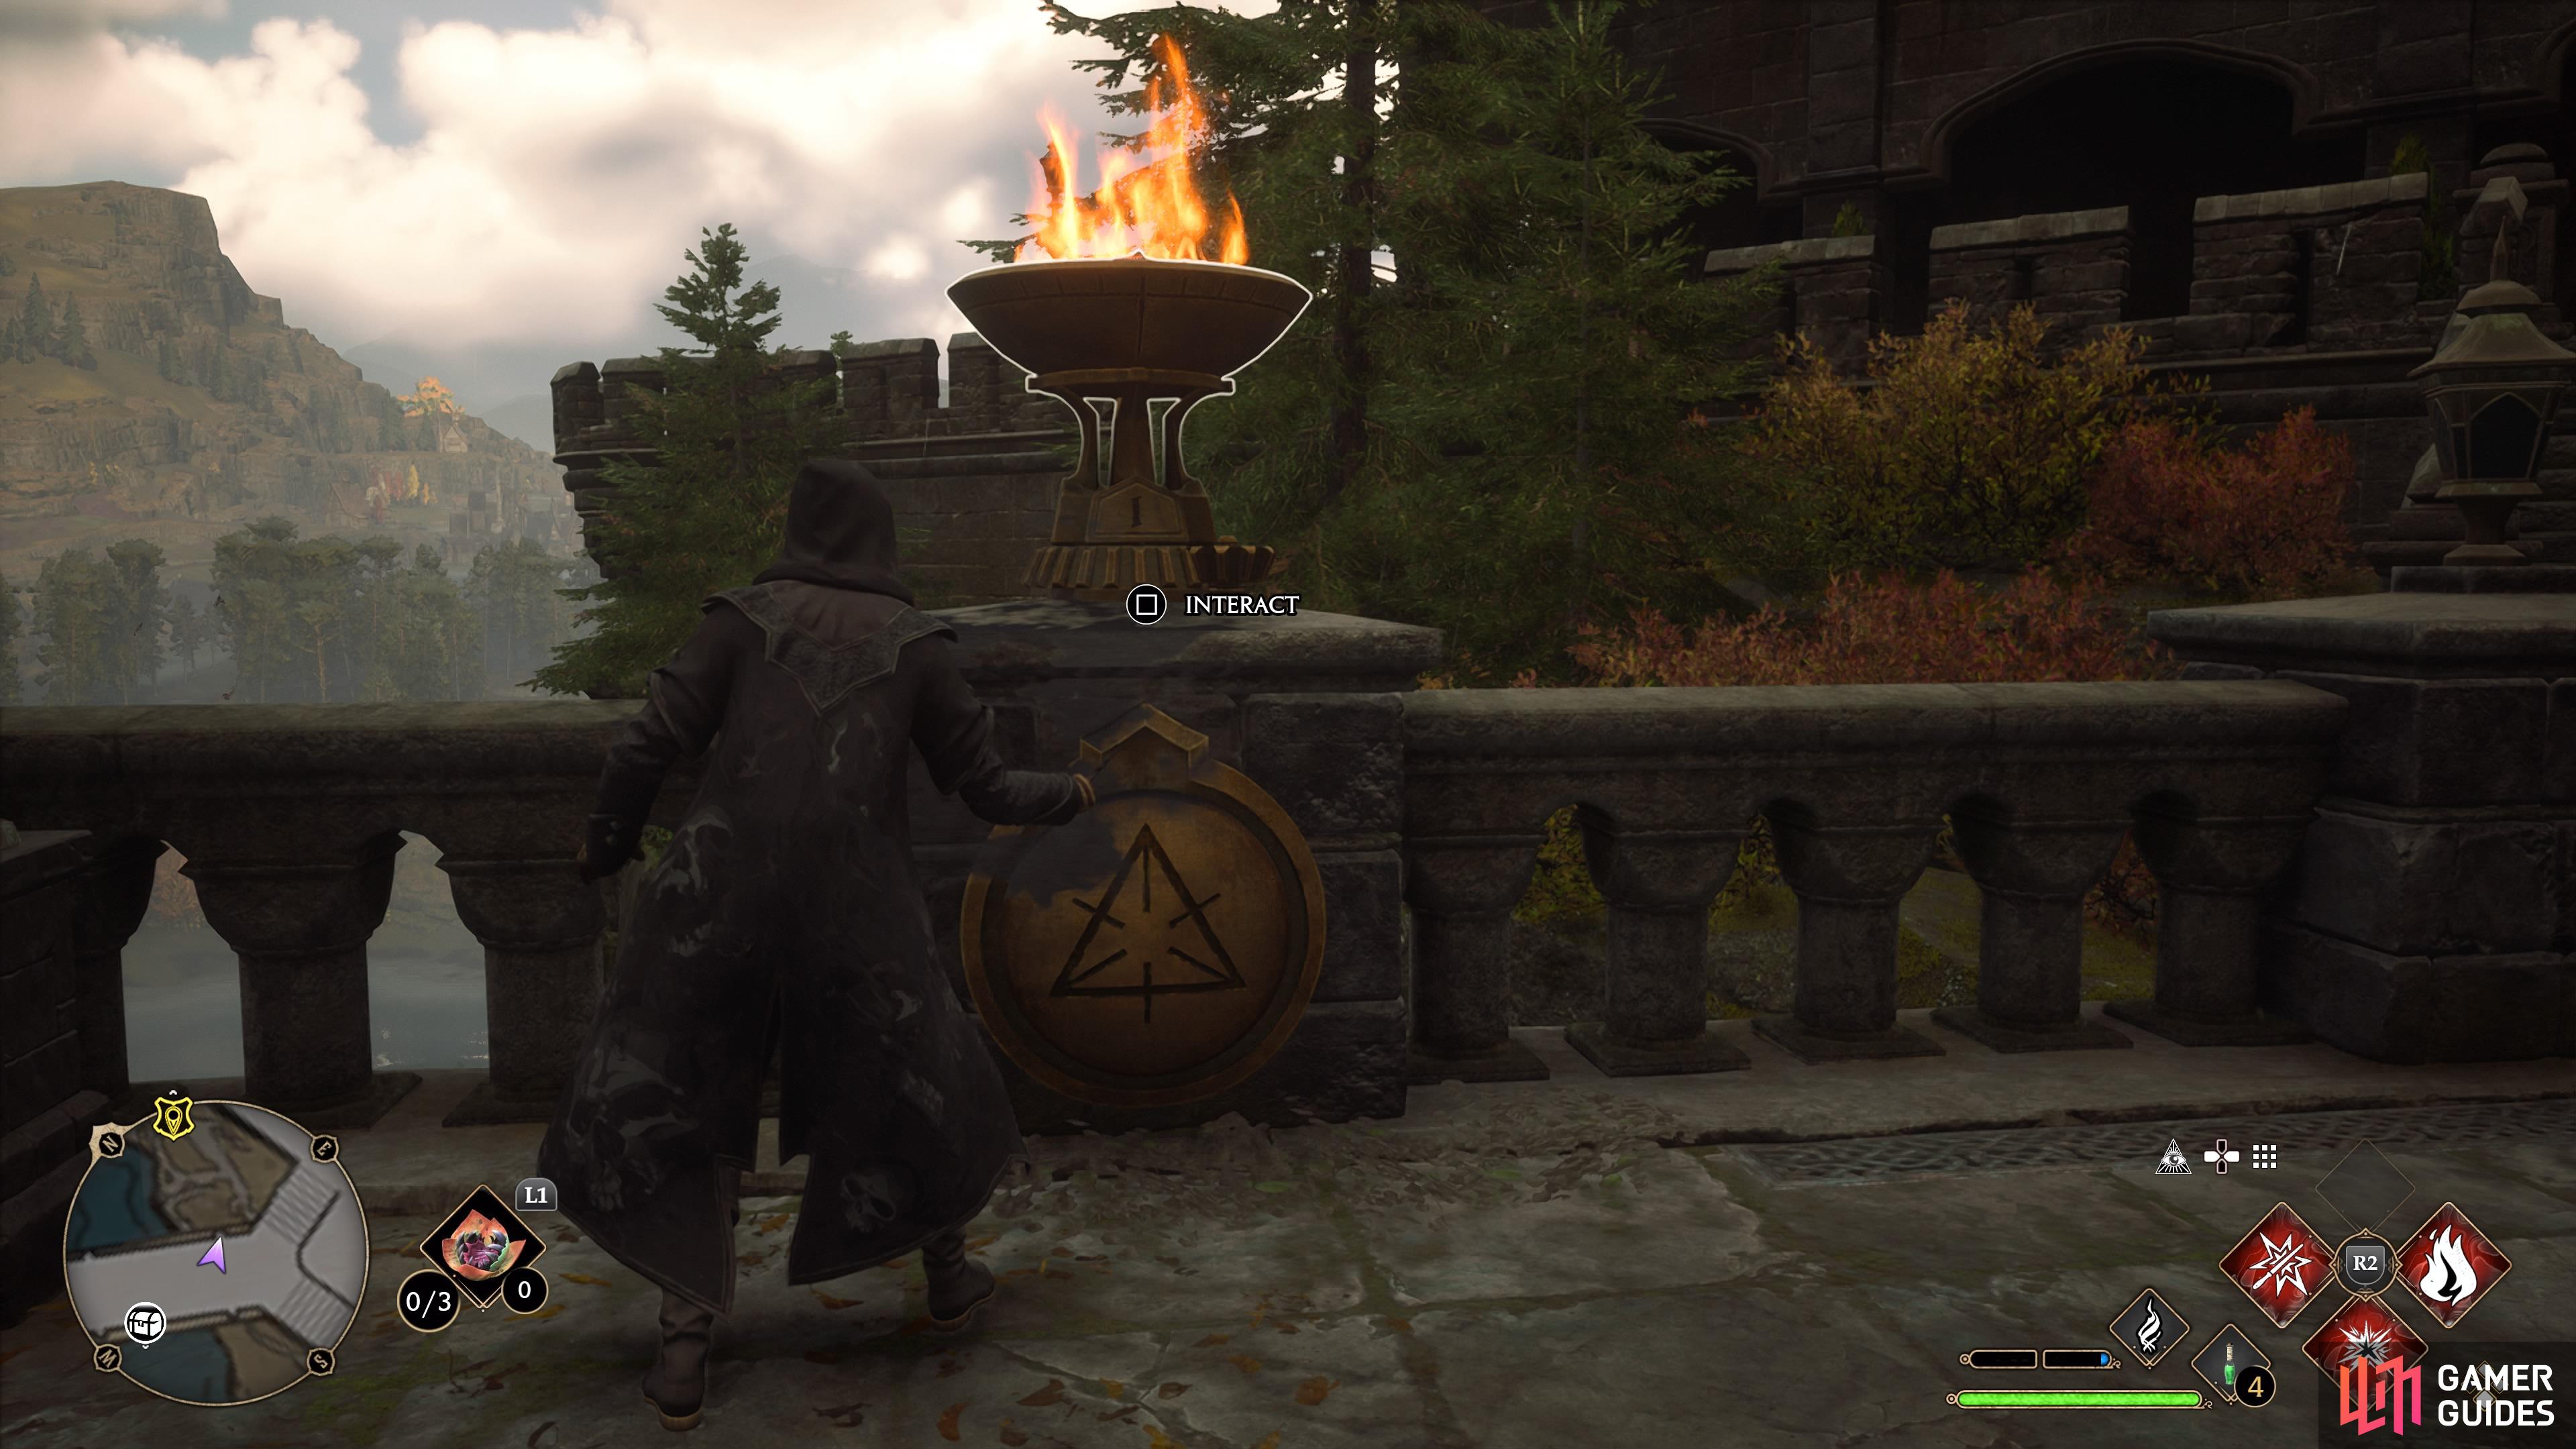 The first brazier that needs to be ignited